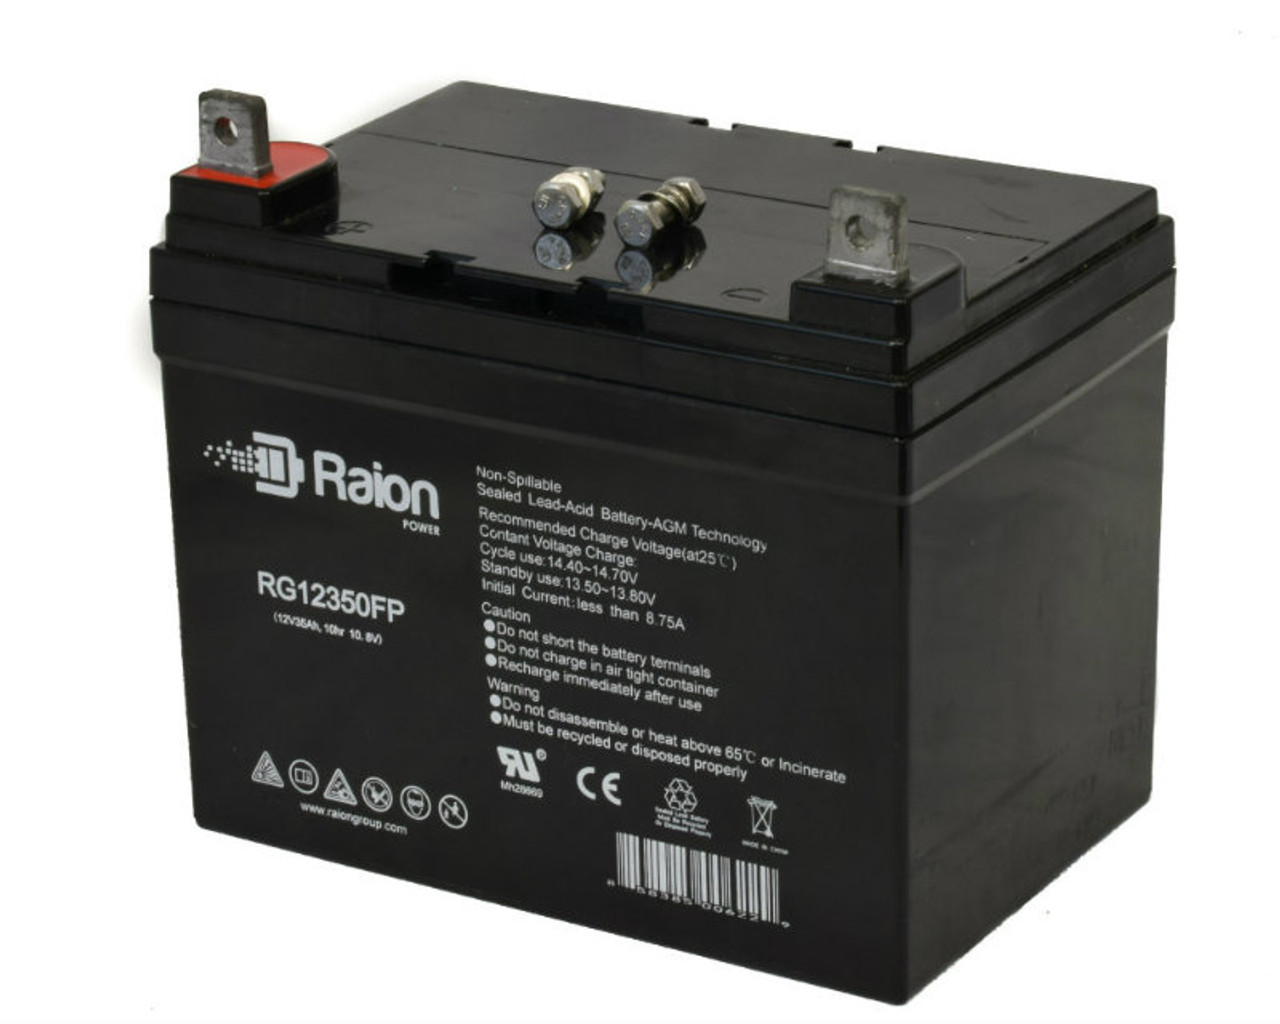 Raion Power Replacement 12V 35Ah RG12350FP Battery for NPP Power NP12-33Ah